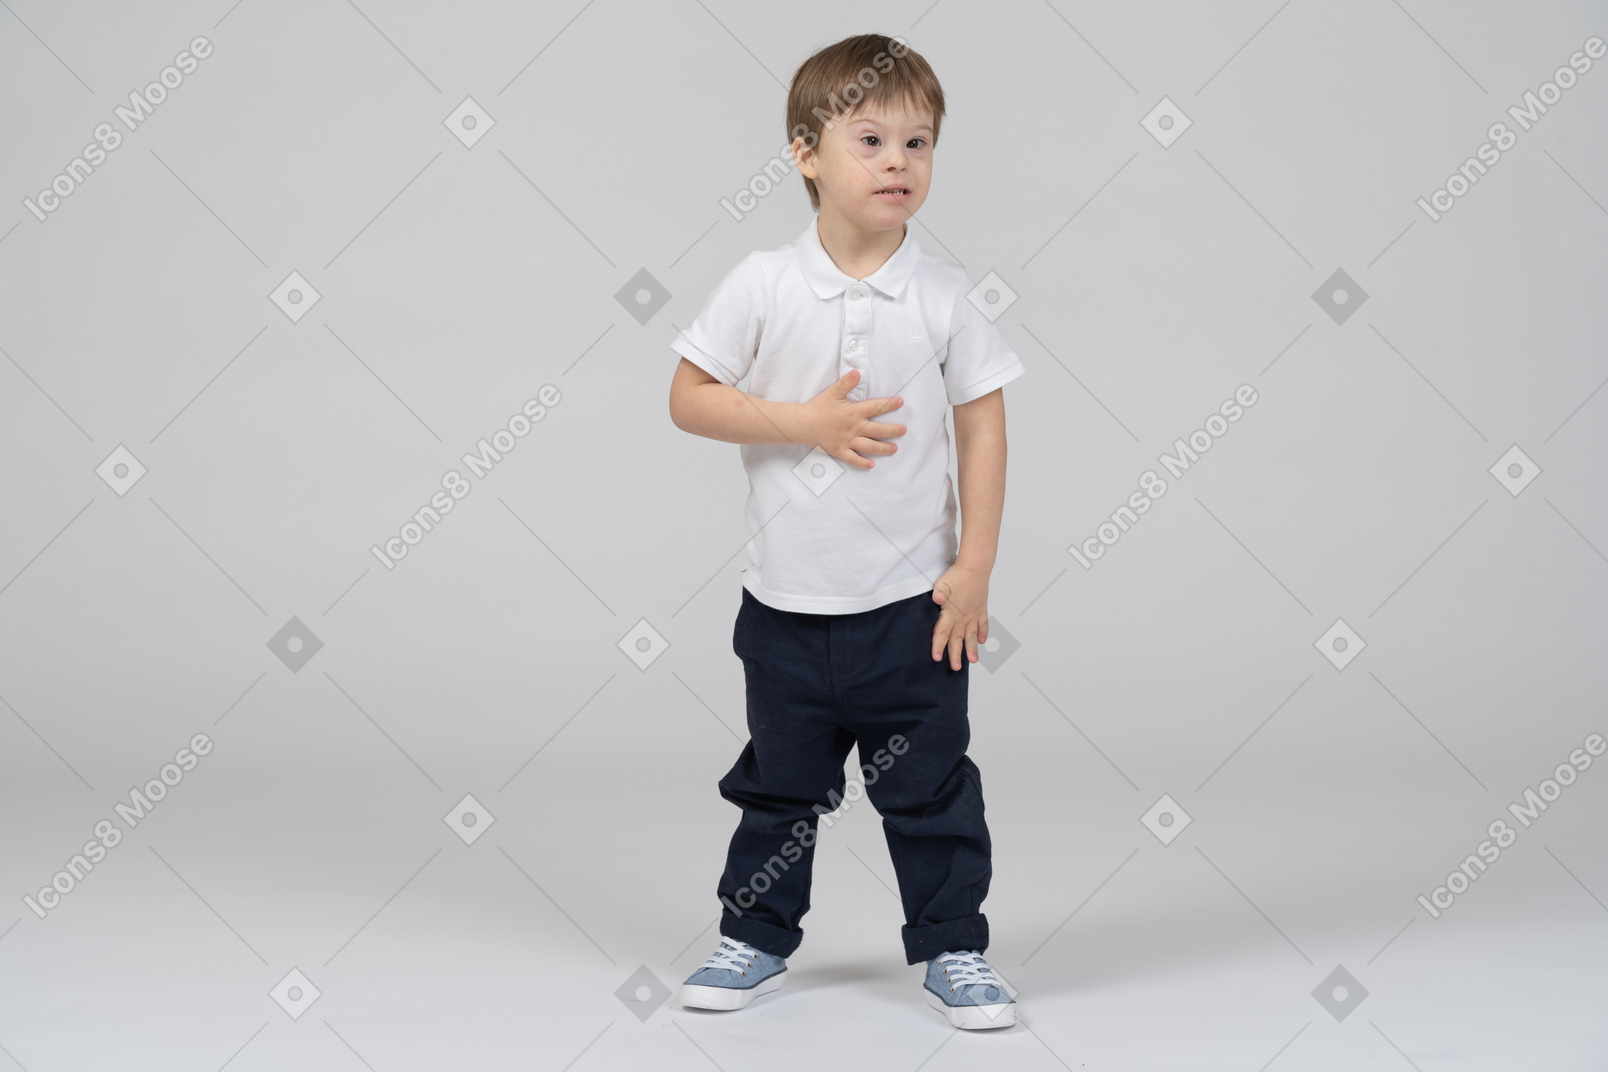 Little boy standing with hand on chest